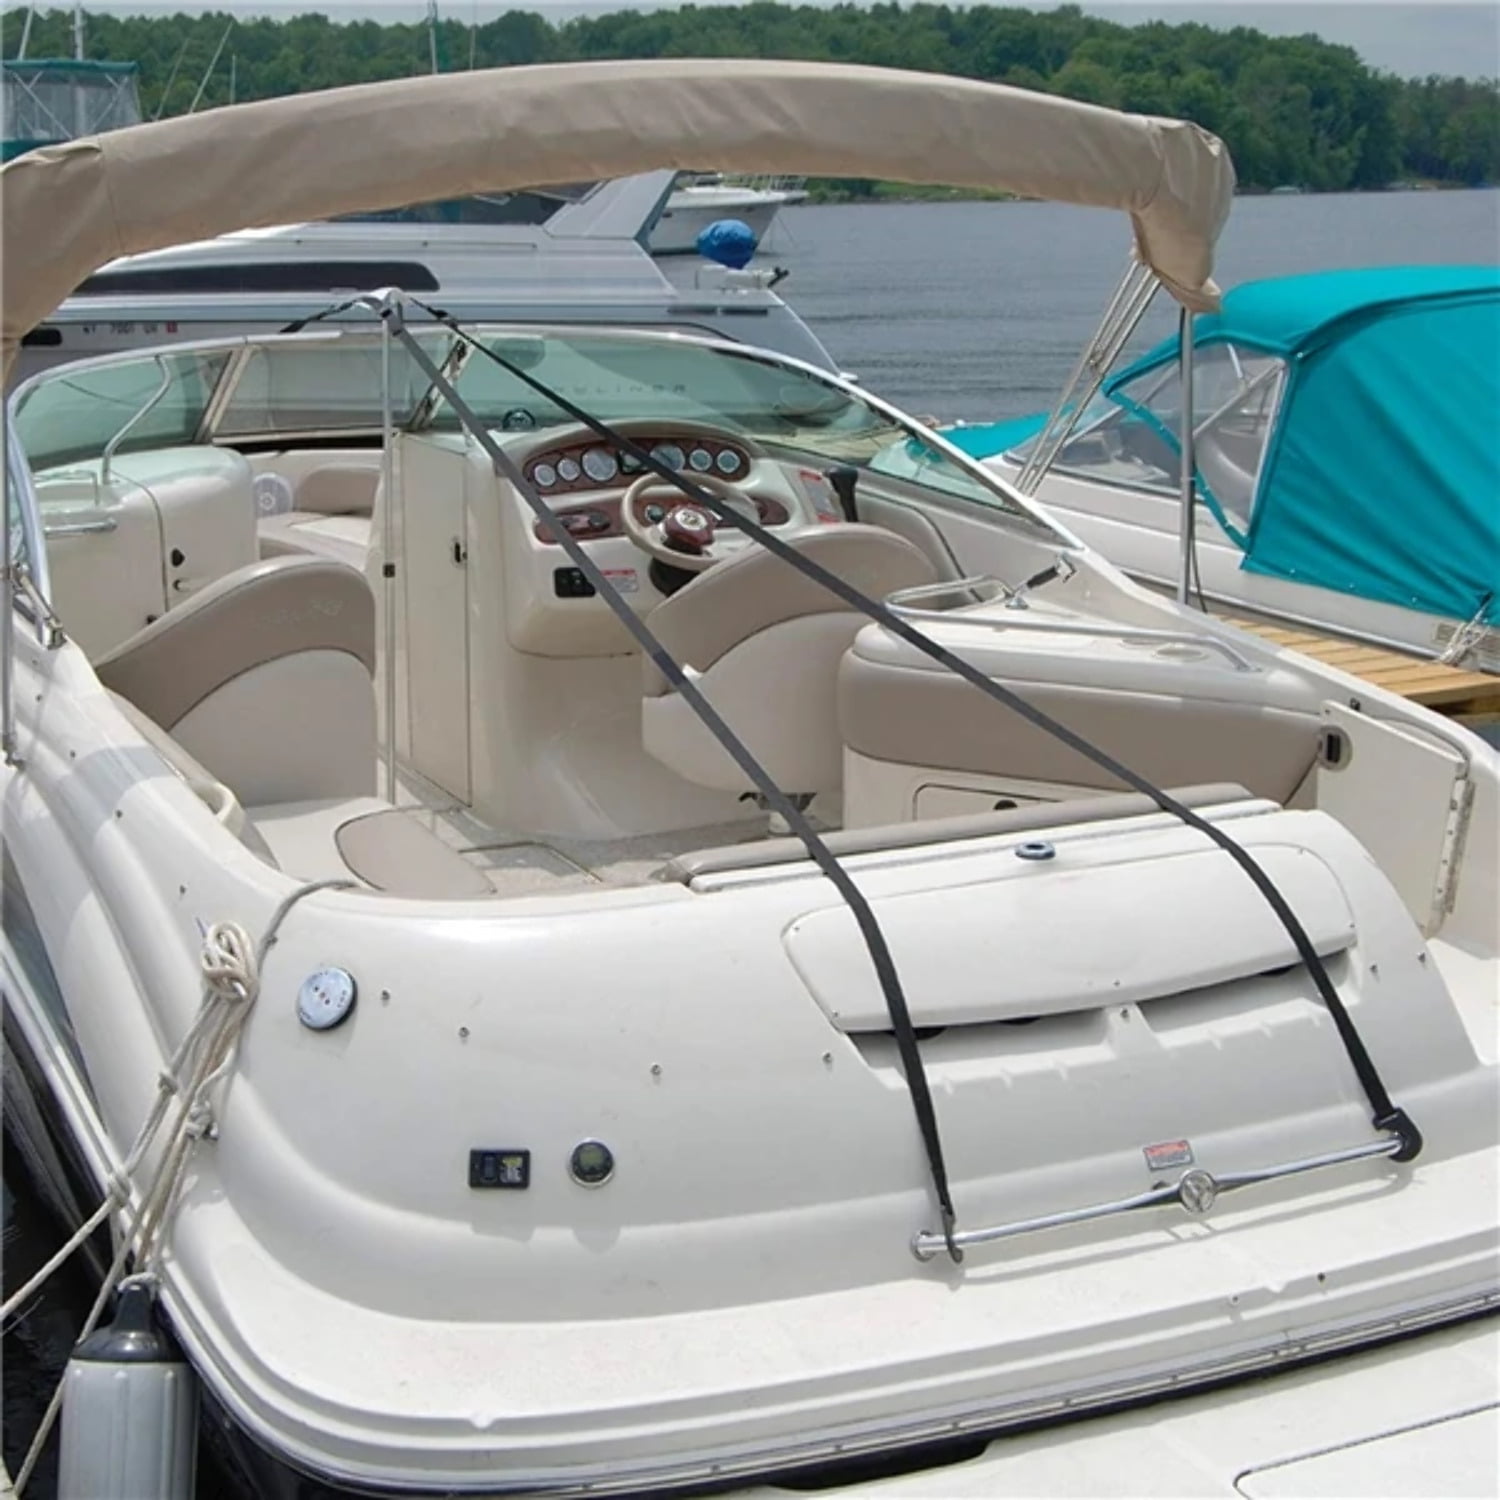 Details about   TAYLOR MADE PRODUCTS 55741 Boat Cover Support System